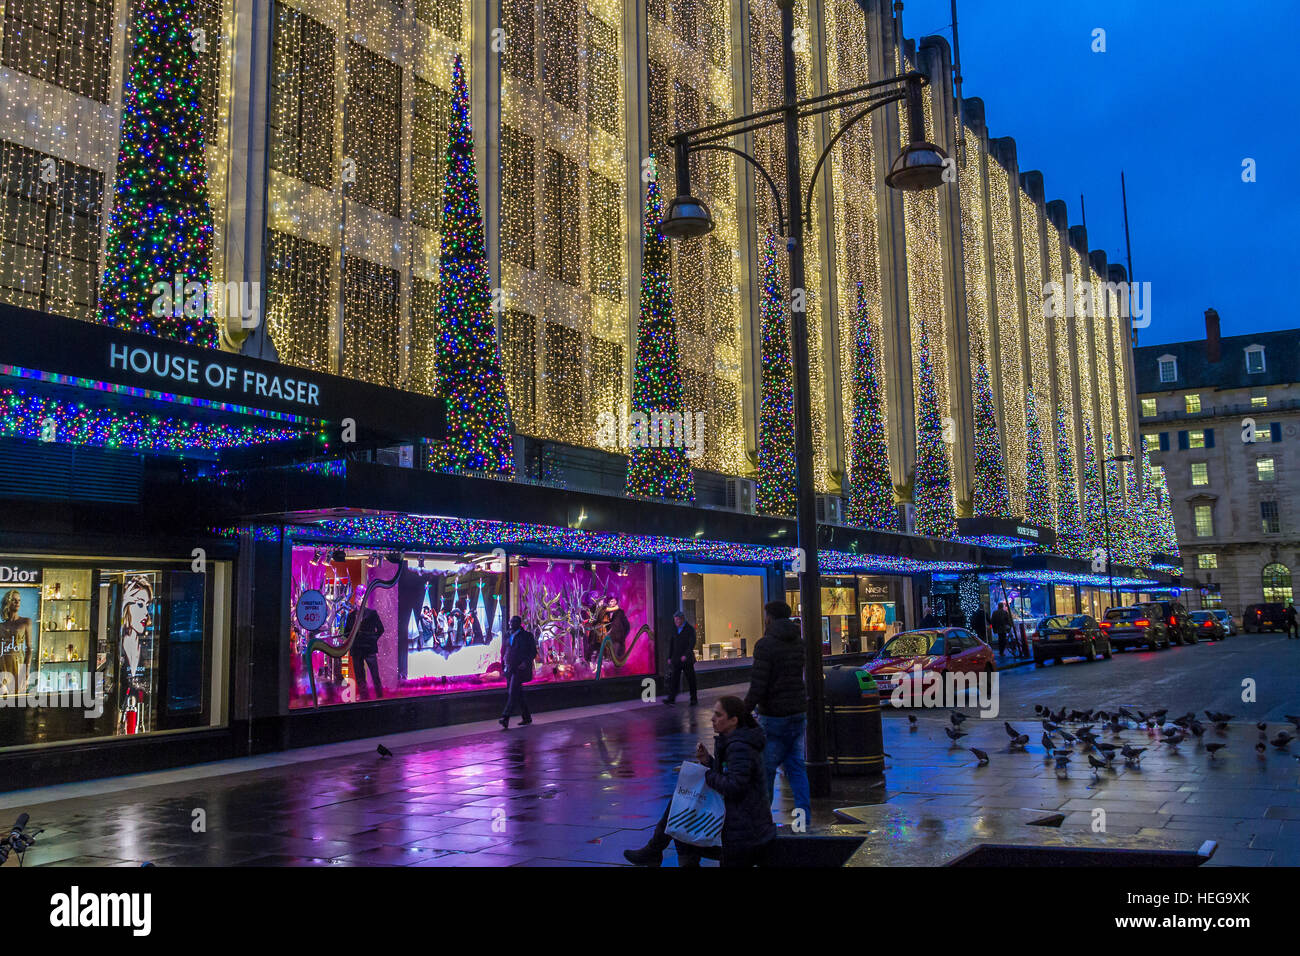 The House Of Fraser on London's Oxford St at Christmas time decorated in Christmas lights, Oxford St, London,UK Stock Photo